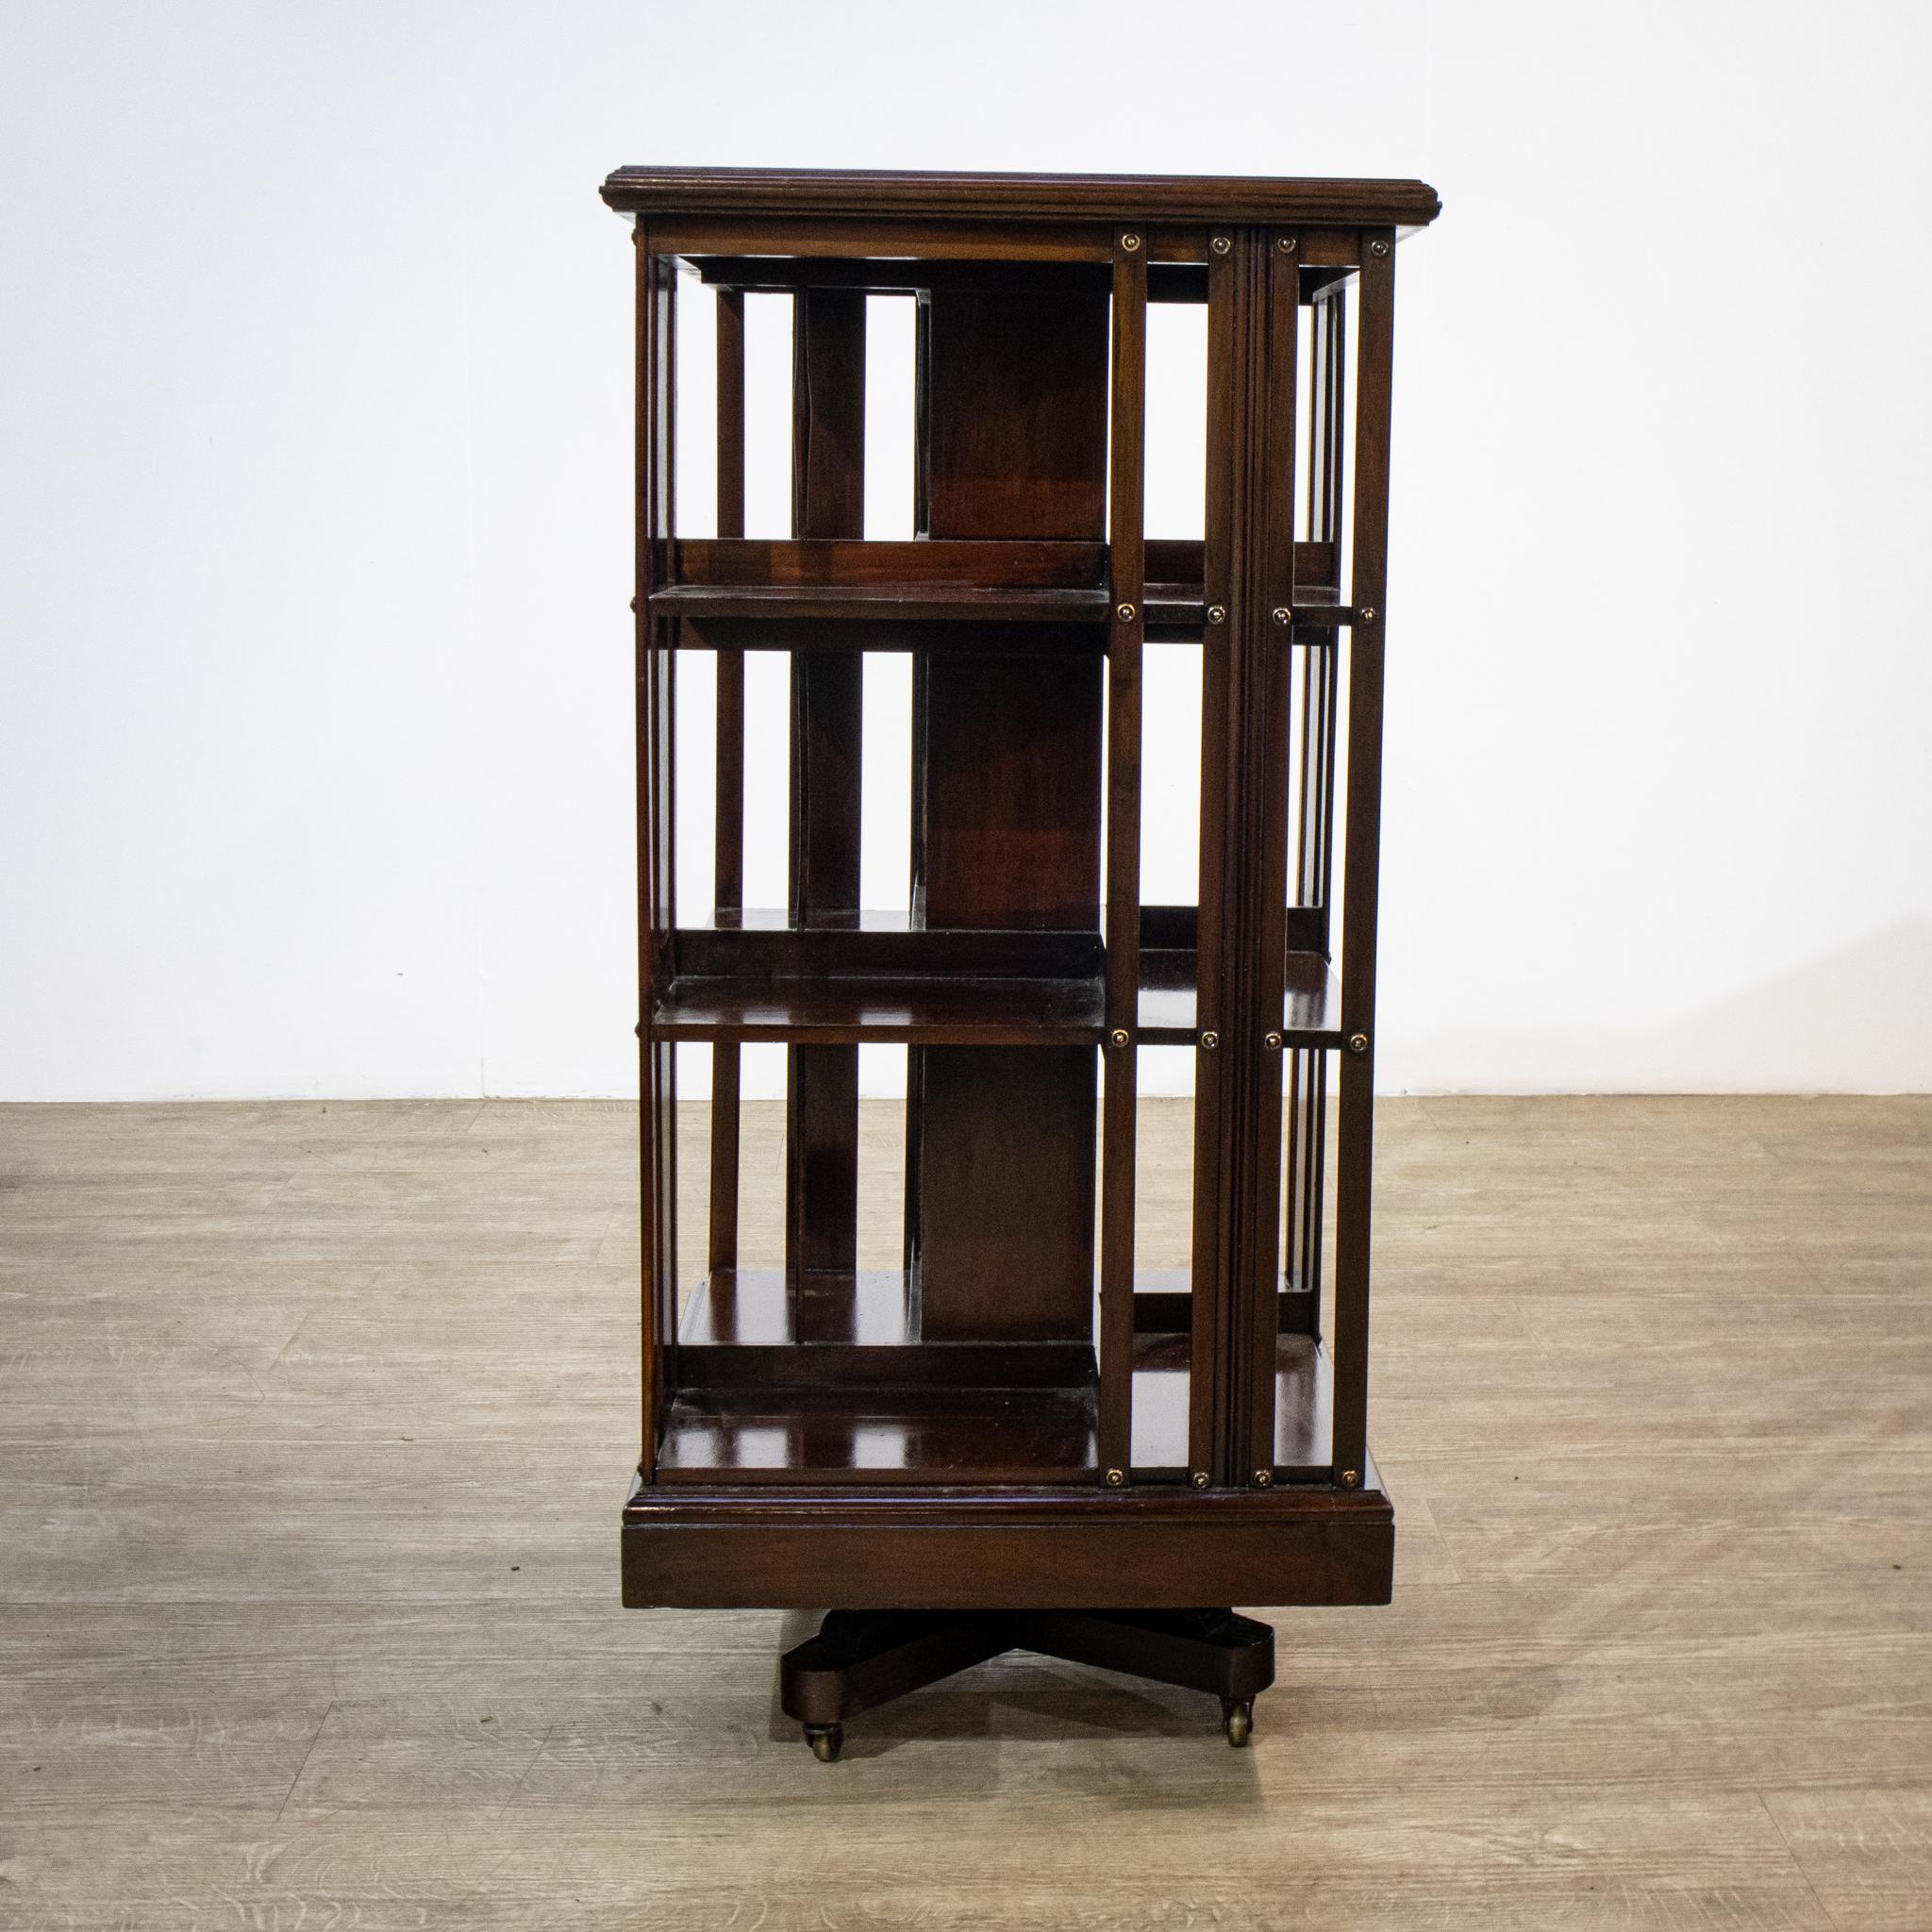 A useful mahogany revolving bookcase which has been recently restored and refinished, this piece stands on a four footed pedestal base with brass castors, so it is easy to move around. The top of the three tiers has shaped vertical spindle